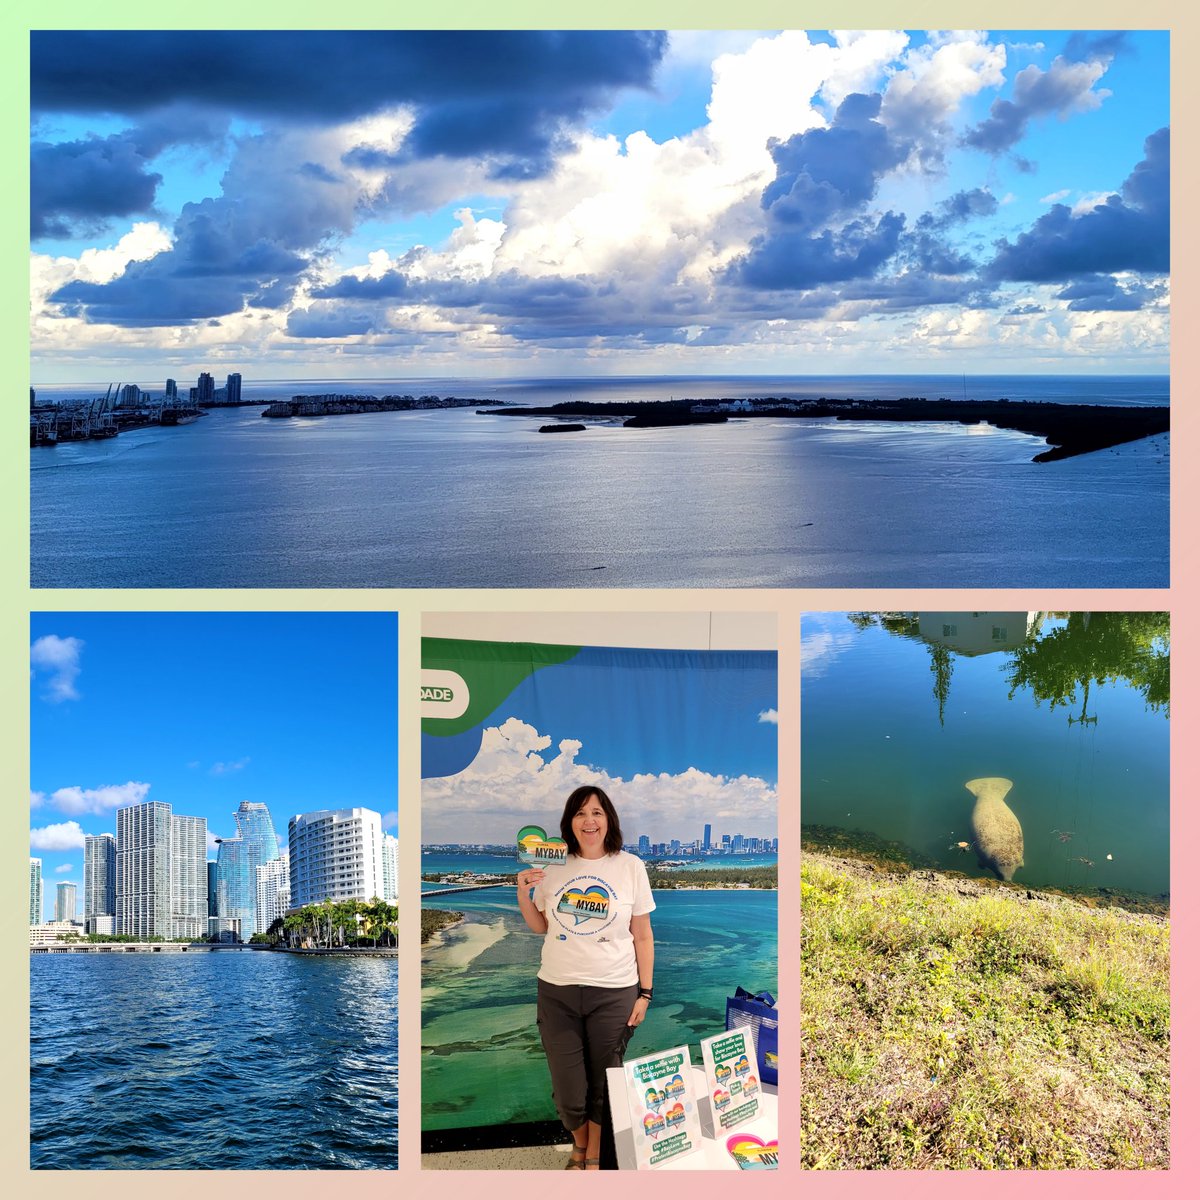 Lucky me - get to be out in all of this beauty for my job. #BayLove #SaveBiscayneBay